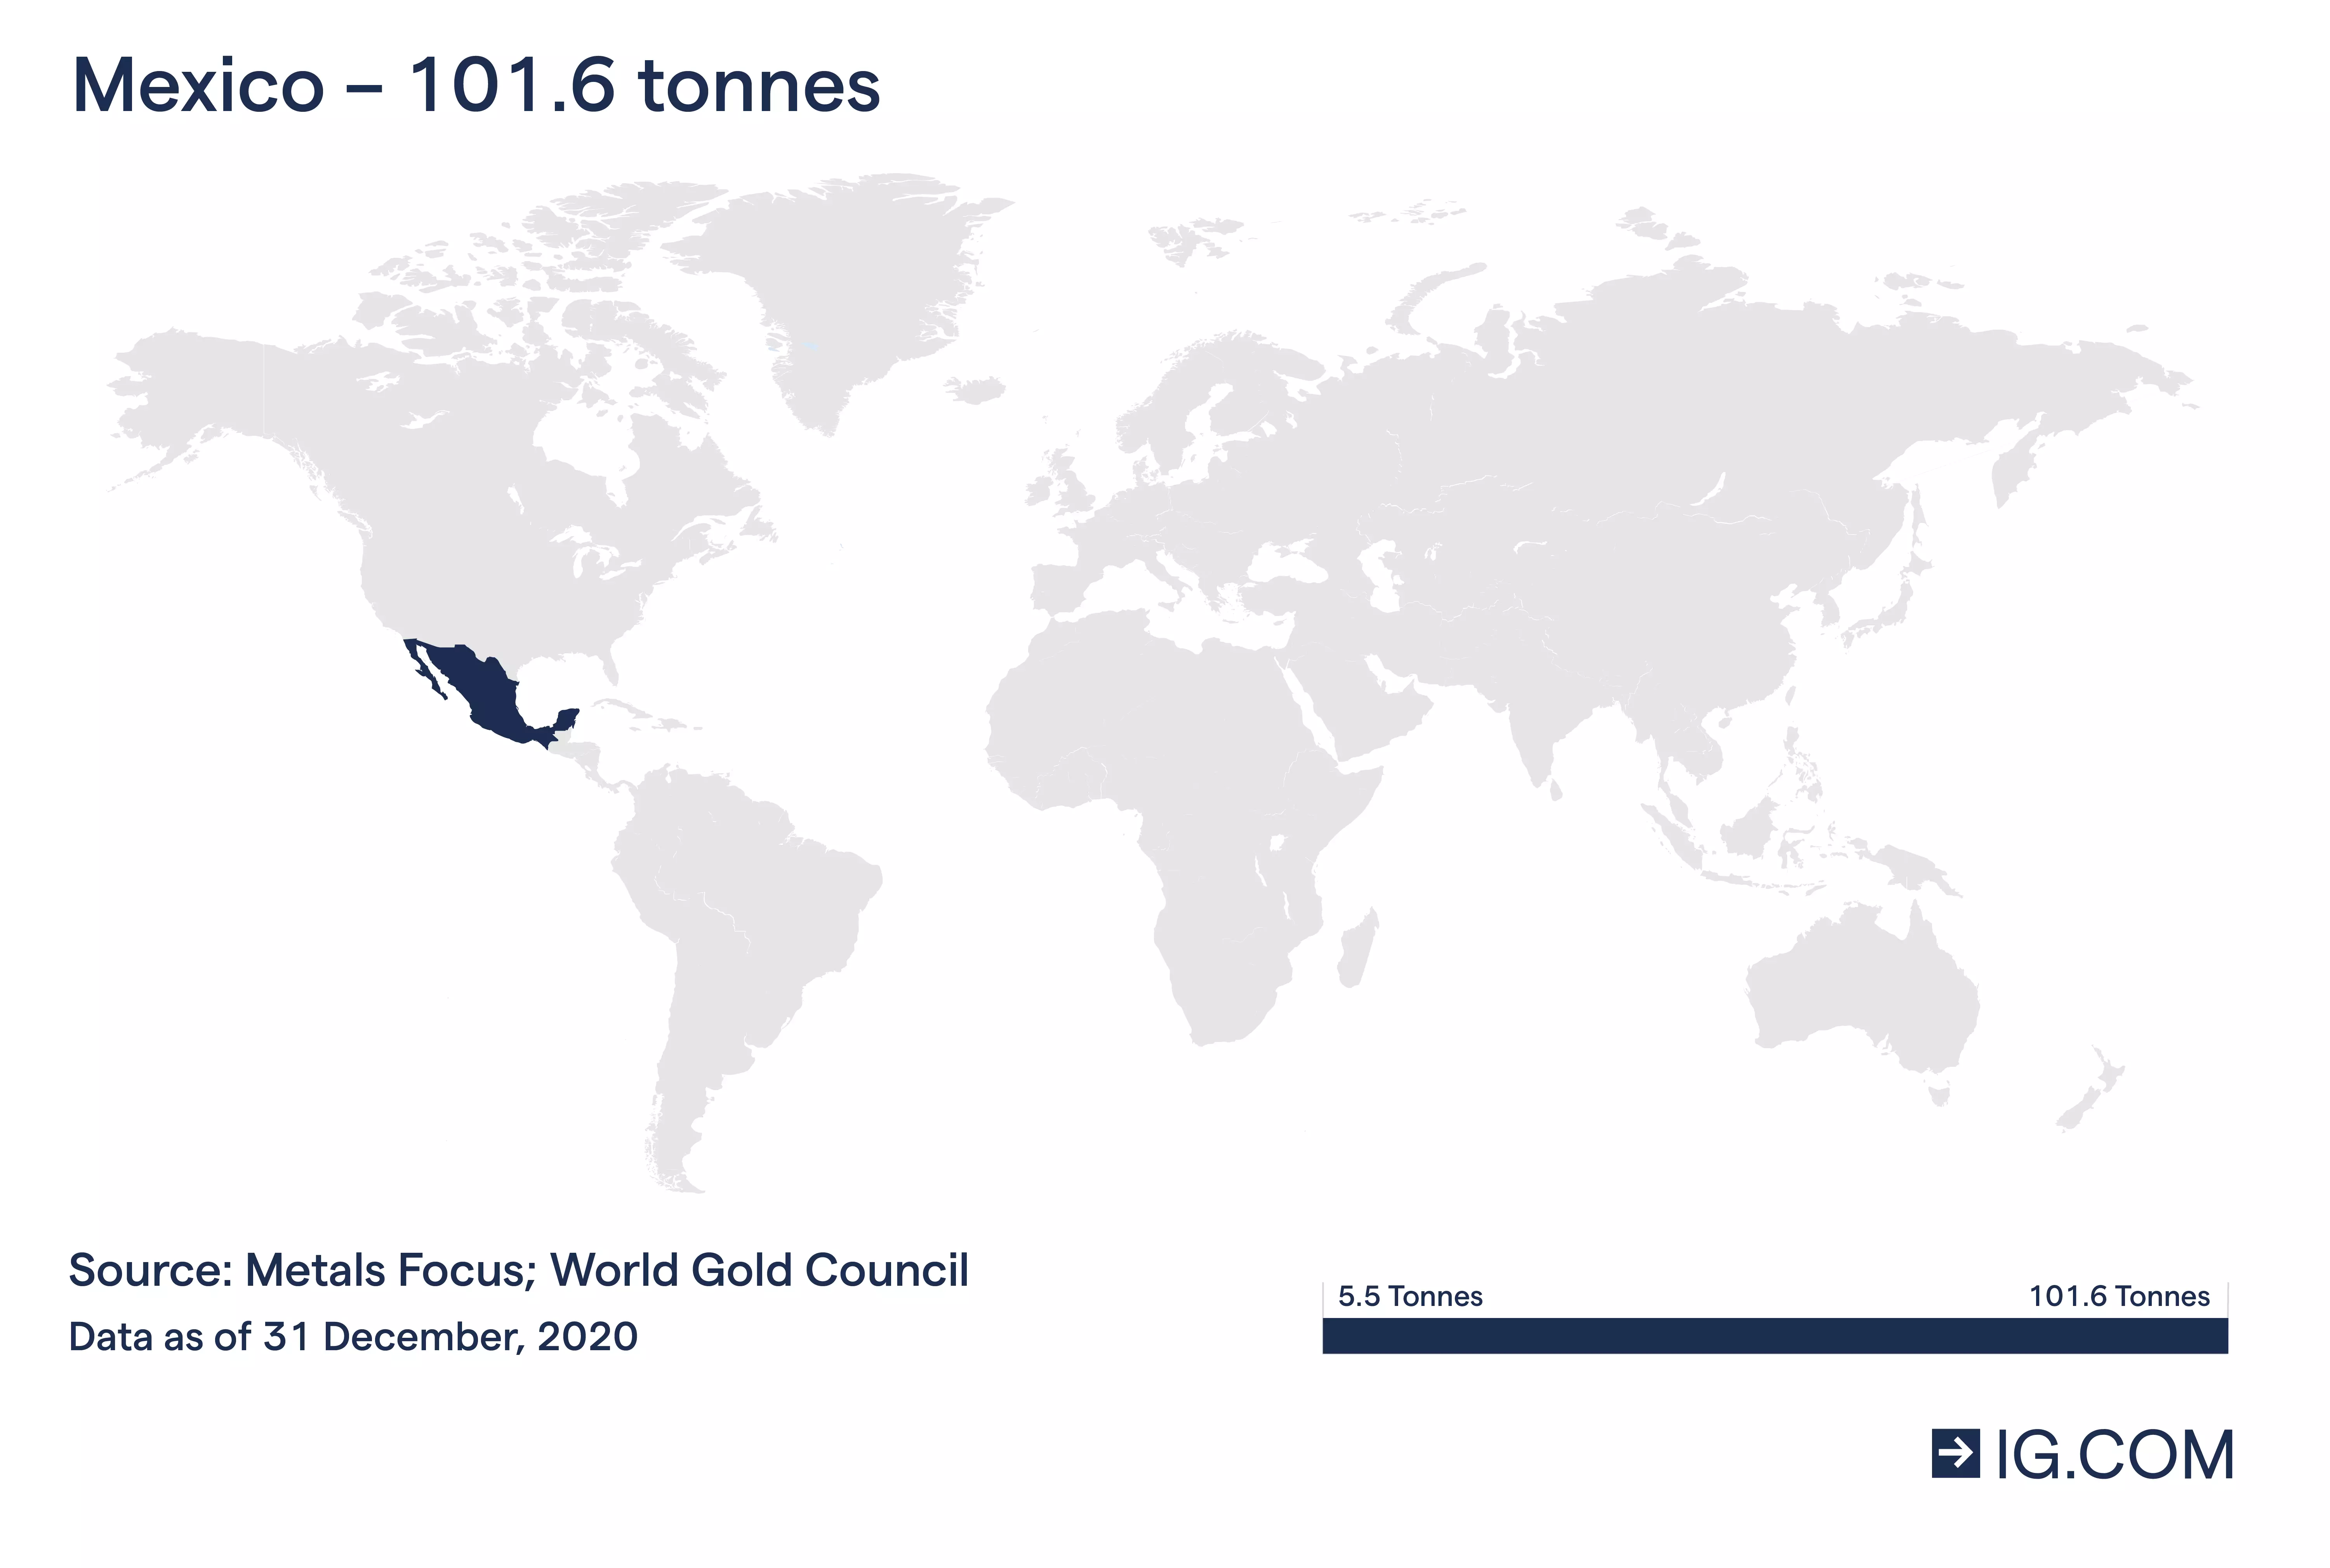 World map showing Mexico, the world’s ninth largest gold producer